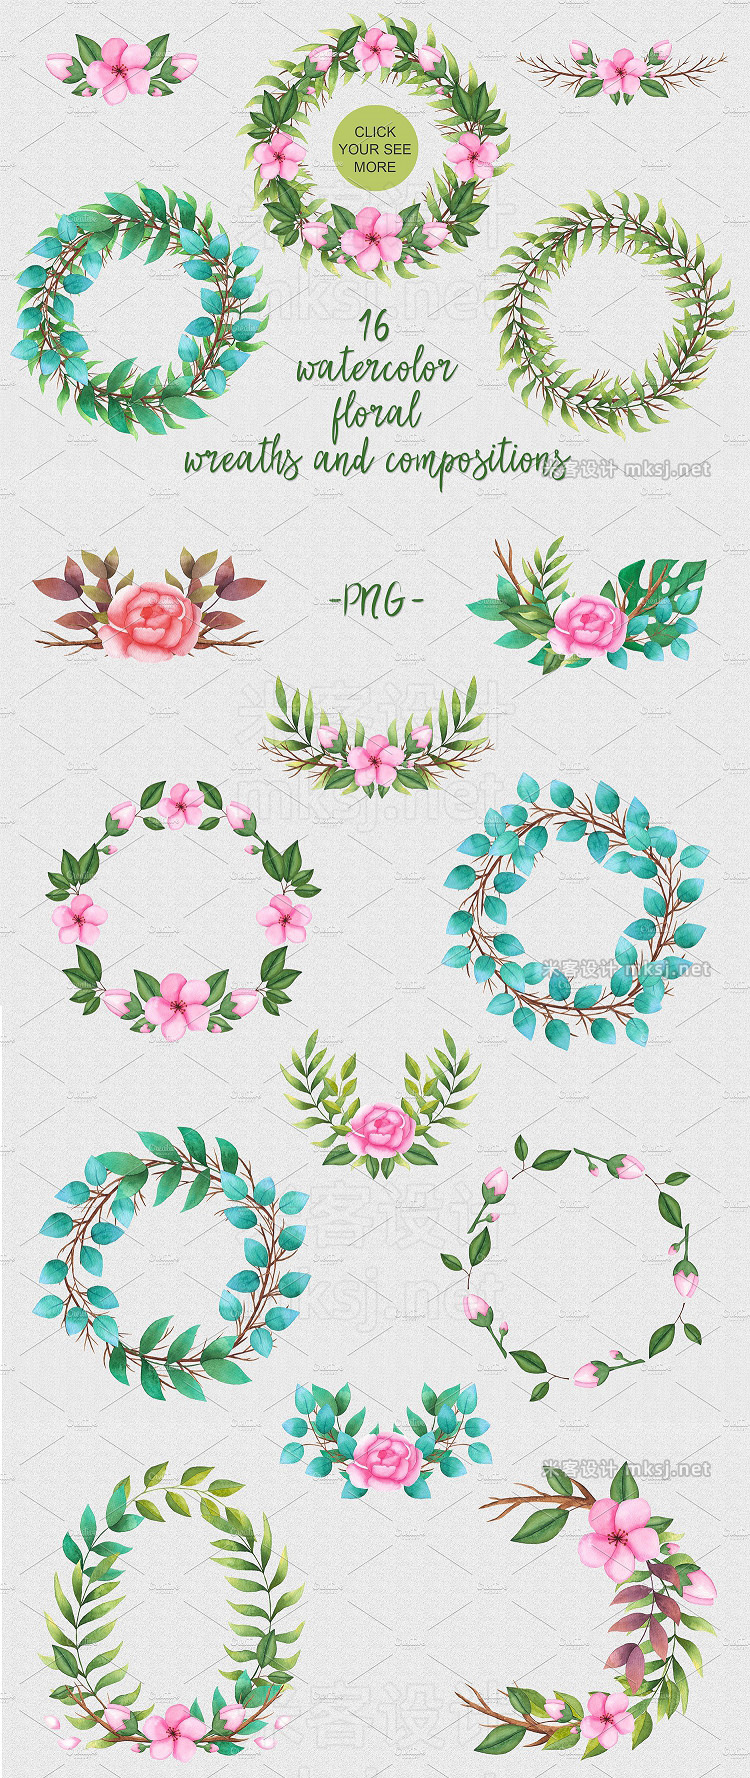 png素材 Watercolor floral wreaths elements